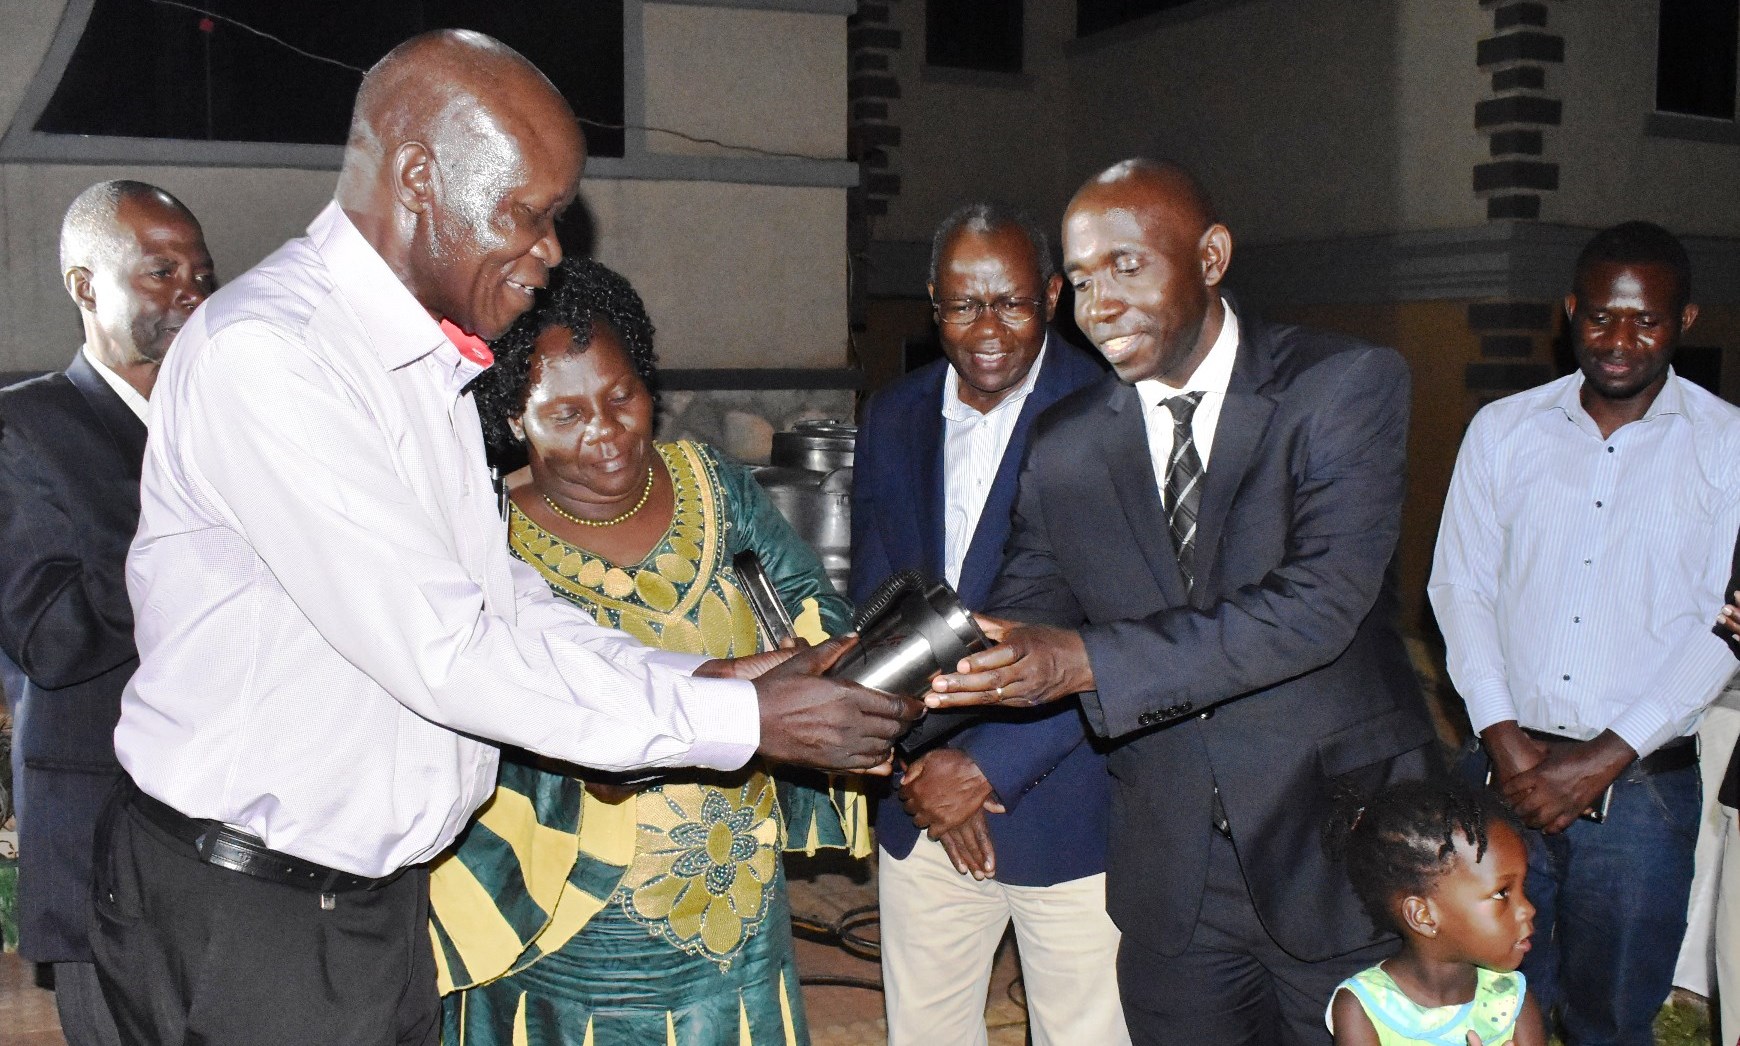 Dr. John Steven Tenywa (Left) flanked by his wife receives a coffee mug from the new Head, Department of Agricultural Production (DAP) and former Mentee Dr. J. B. Tumuhairwe, as Principal CAES-Prof. Bernard Bashaasha (Rear Blue Jacket) witnesses during the function on 17th August 2019, Grand Global Hotel, Kampala Uganda